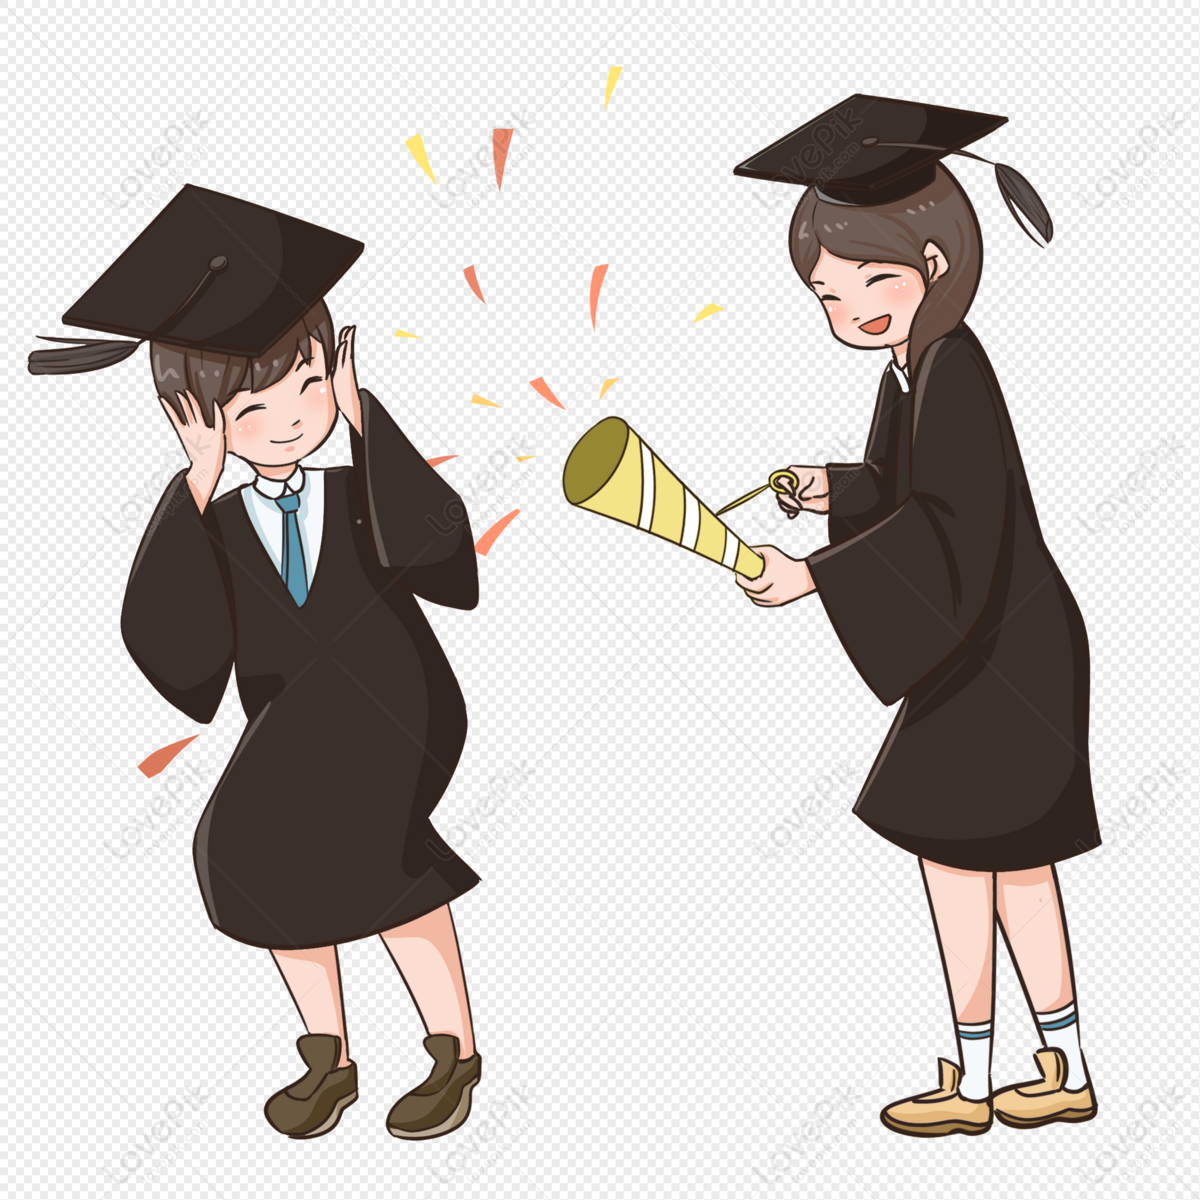 Boy And Girl Graduation With Fireworks PNG Hd Transparent Image And ...